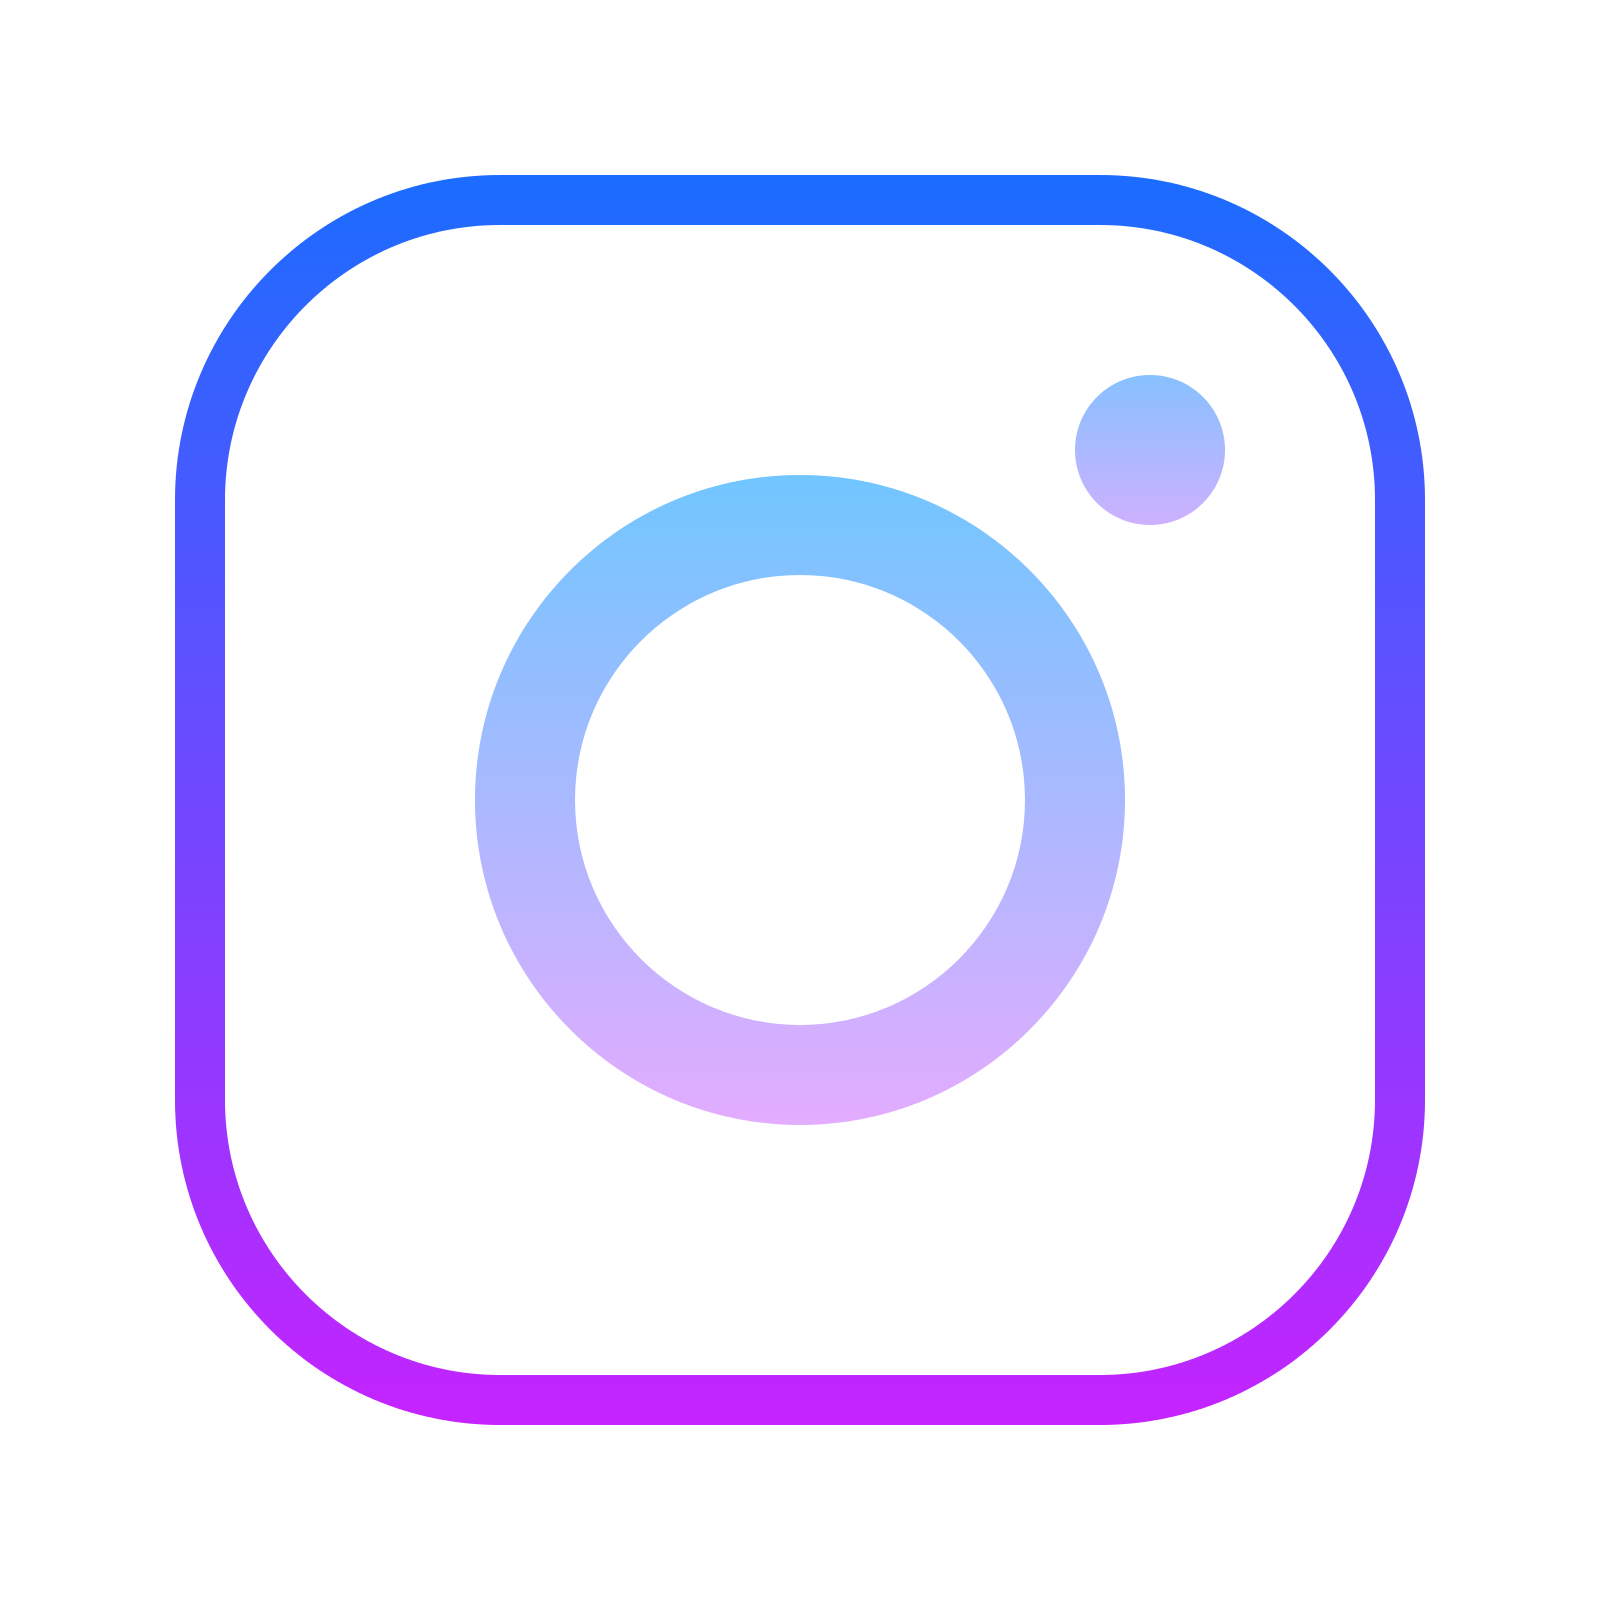 Instagram Icon PNG Transparent Instagram Icon.PNG Images. PlusPNG